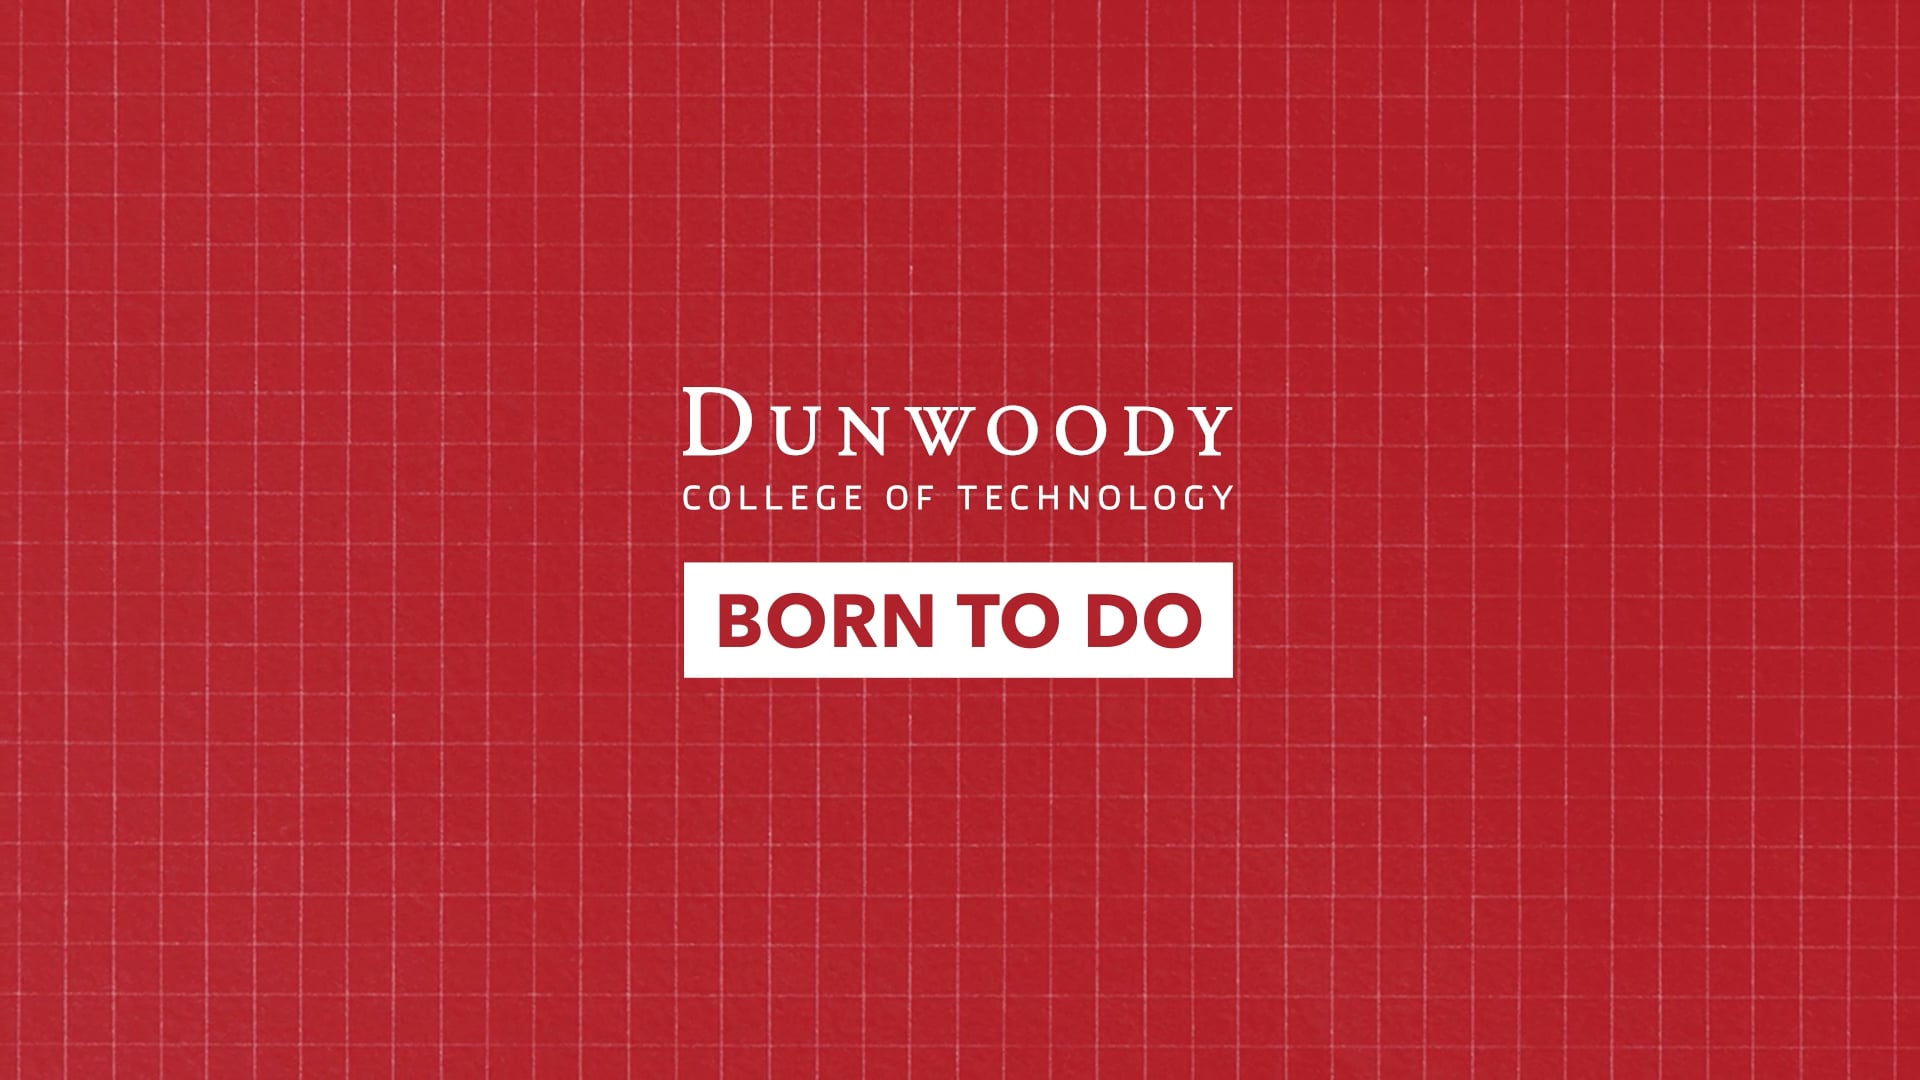 Dunwoody "Generation Do Campaign" (:30)